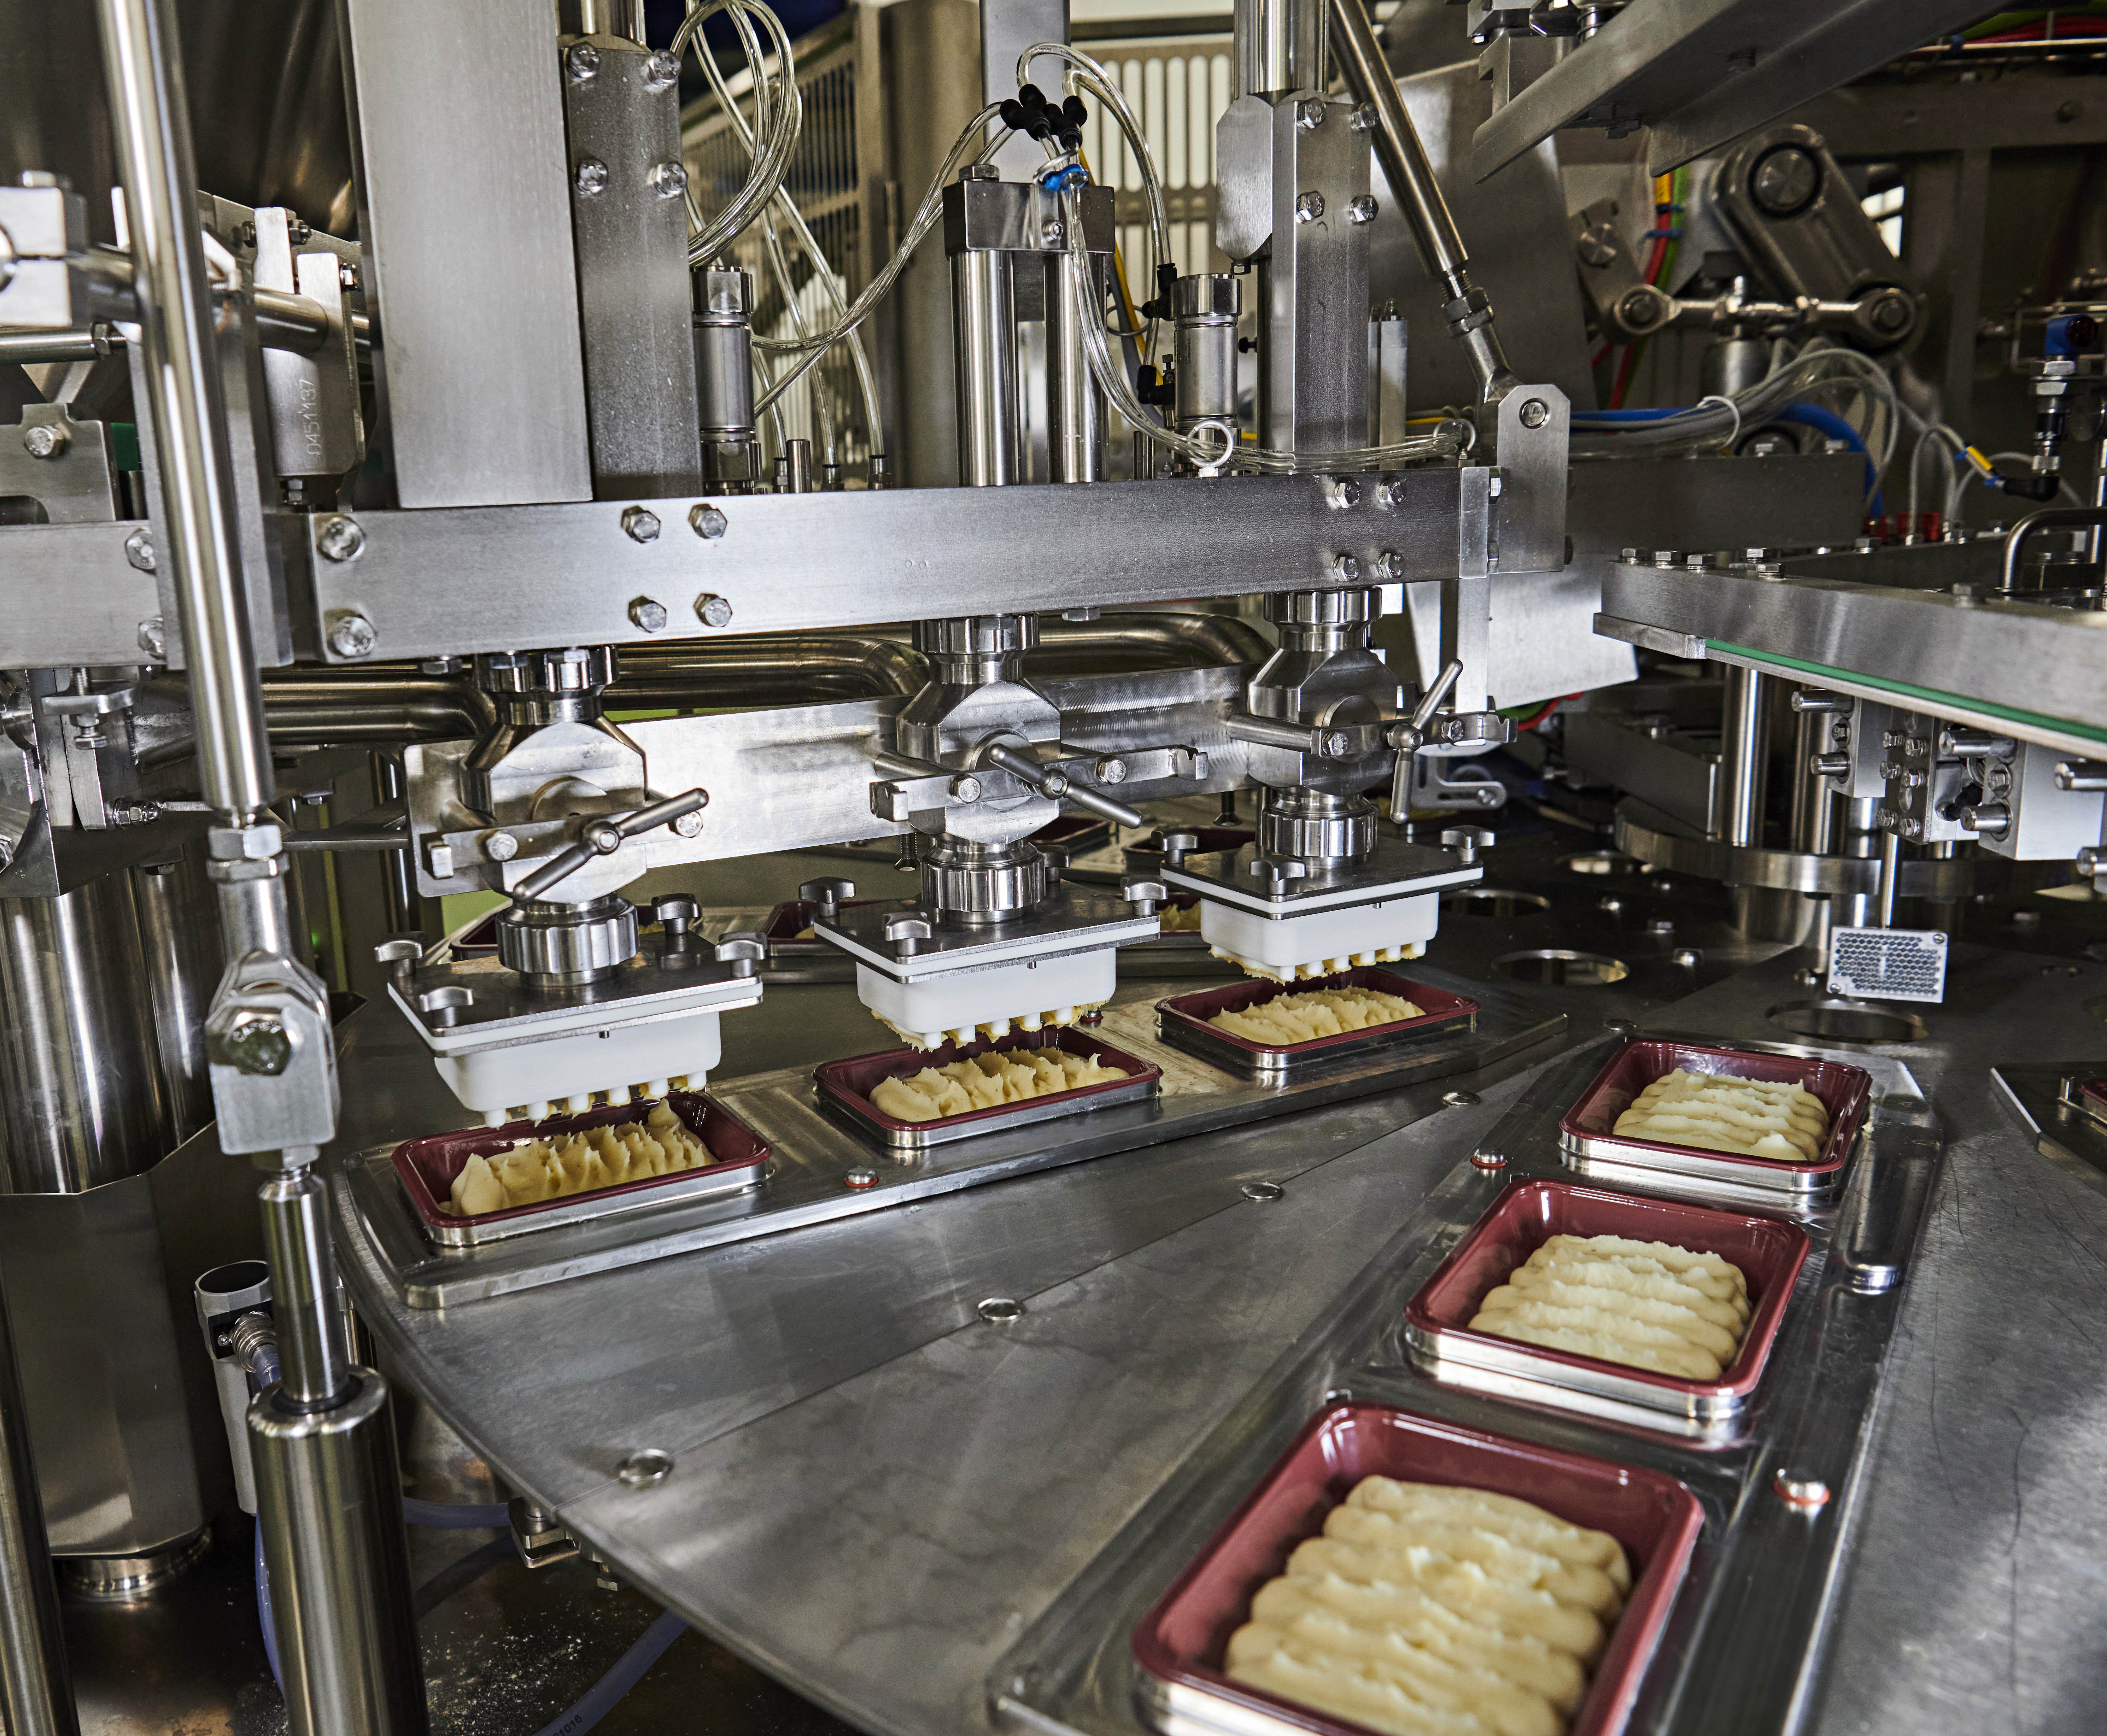 Mashed potato being made at Branston’s new multi-million pound mash factory near Lincoln. (Andy Weekes/ Branston/ PA)